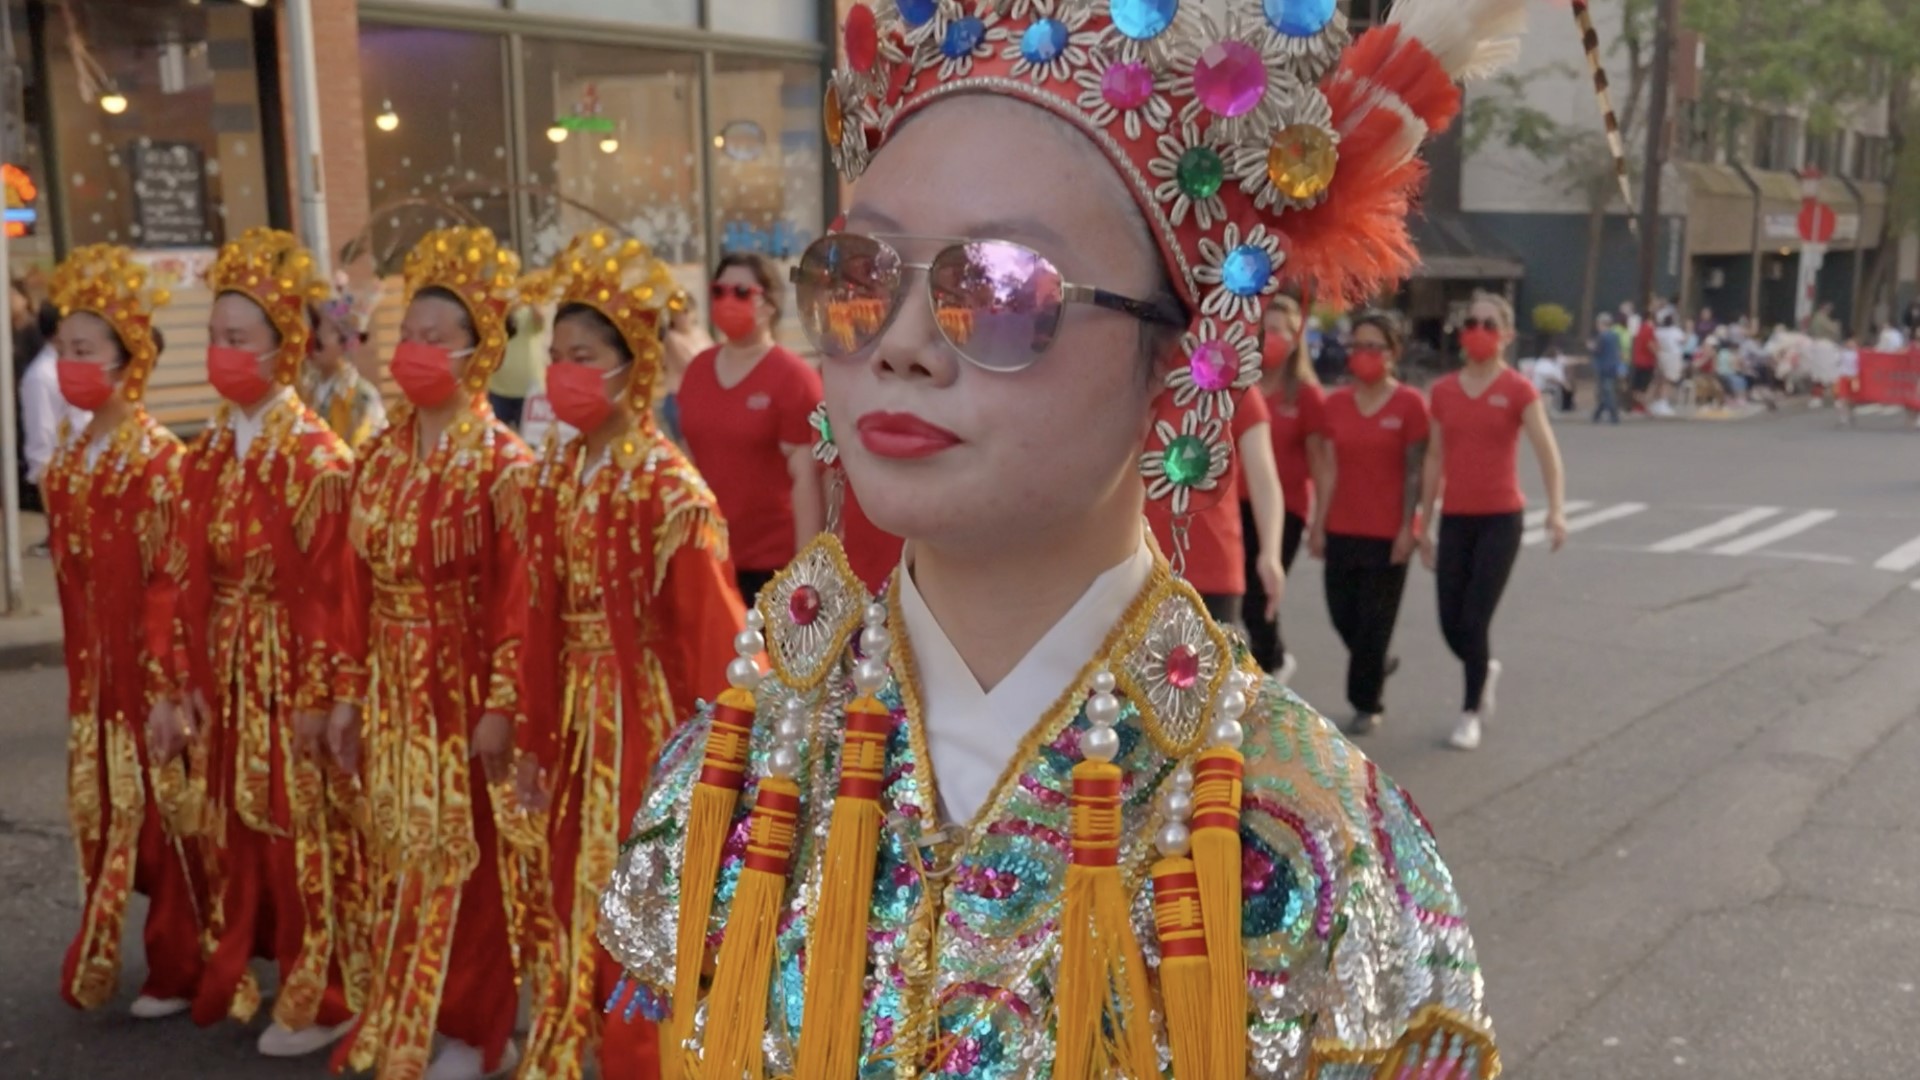 The Seattle Chinese Community Girls Drill Team marches on in a new documentary. #k5evening